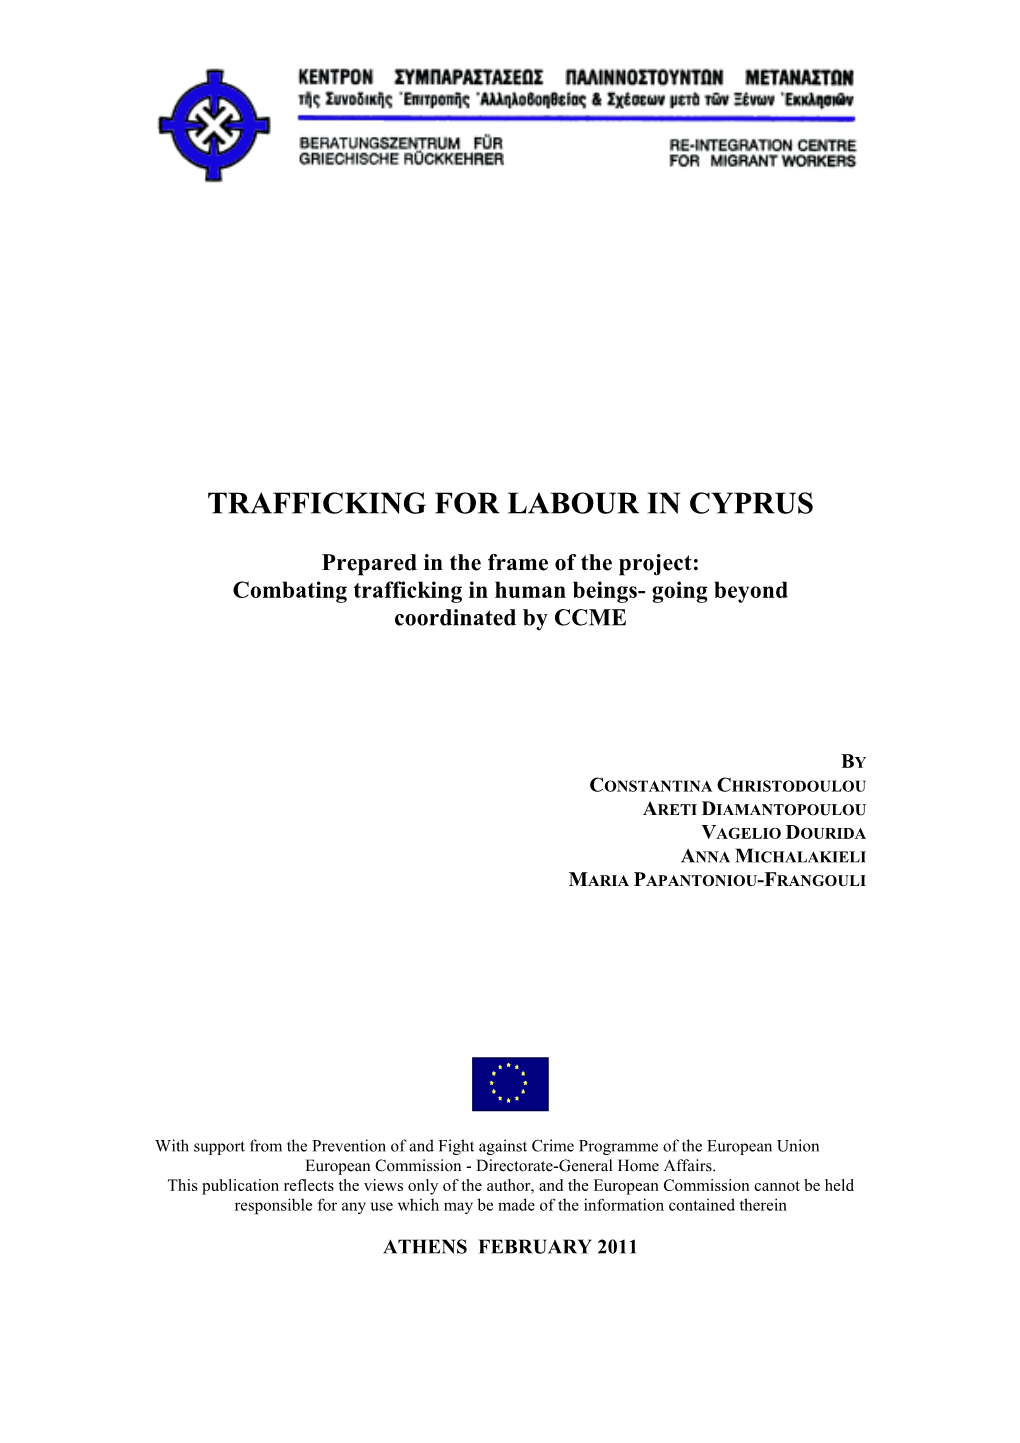 Trafficking for Labour in Cyprus